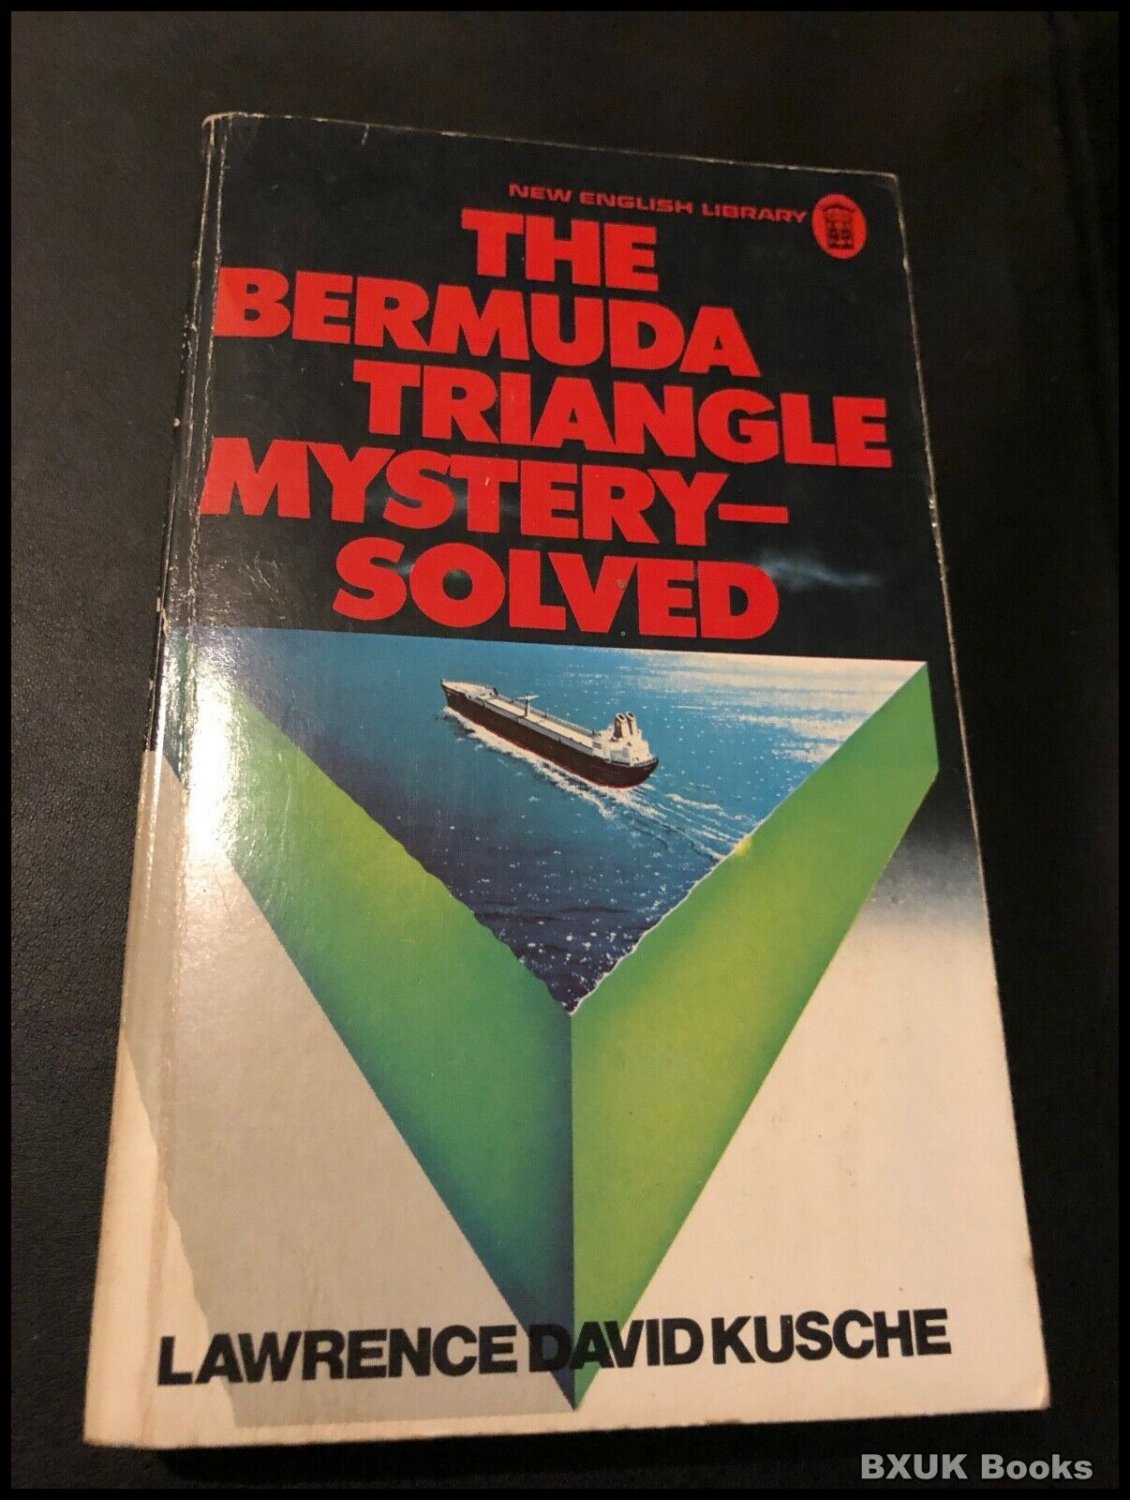 Bermuda Triangle Mystery Solved by Lawrence David Kusche (Paperback, 1975)